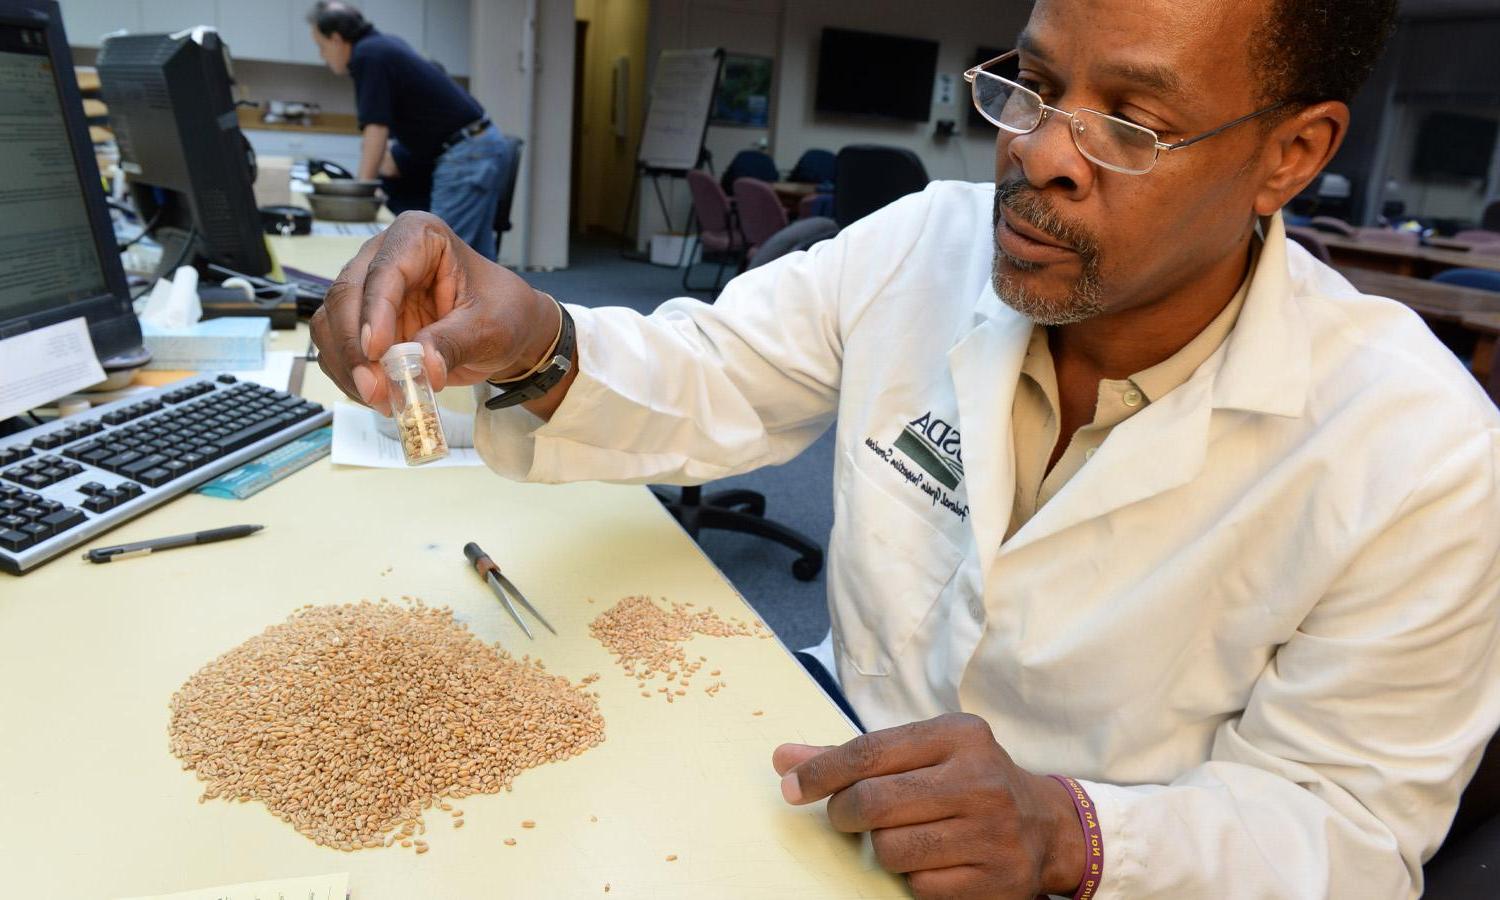 A USDA scientist inspects grains.